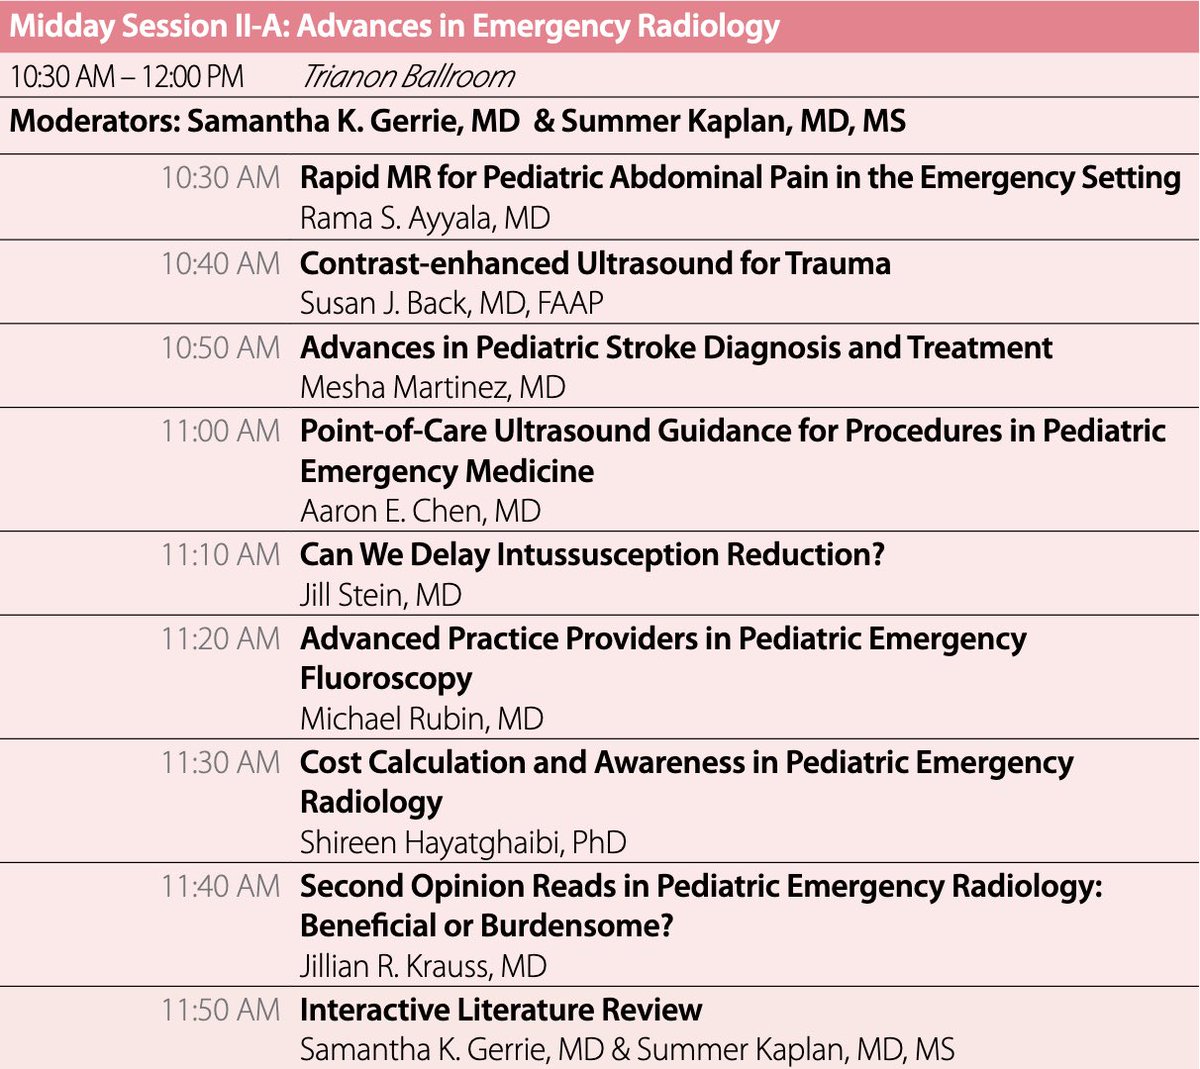 We have an ⭐️ all star ⭐️ lineup of midday sessions today! Learn about quantitative #USRad, pearls and pitfalls in research, and advances in #EMRad. #pedsrad #imagingourfuture